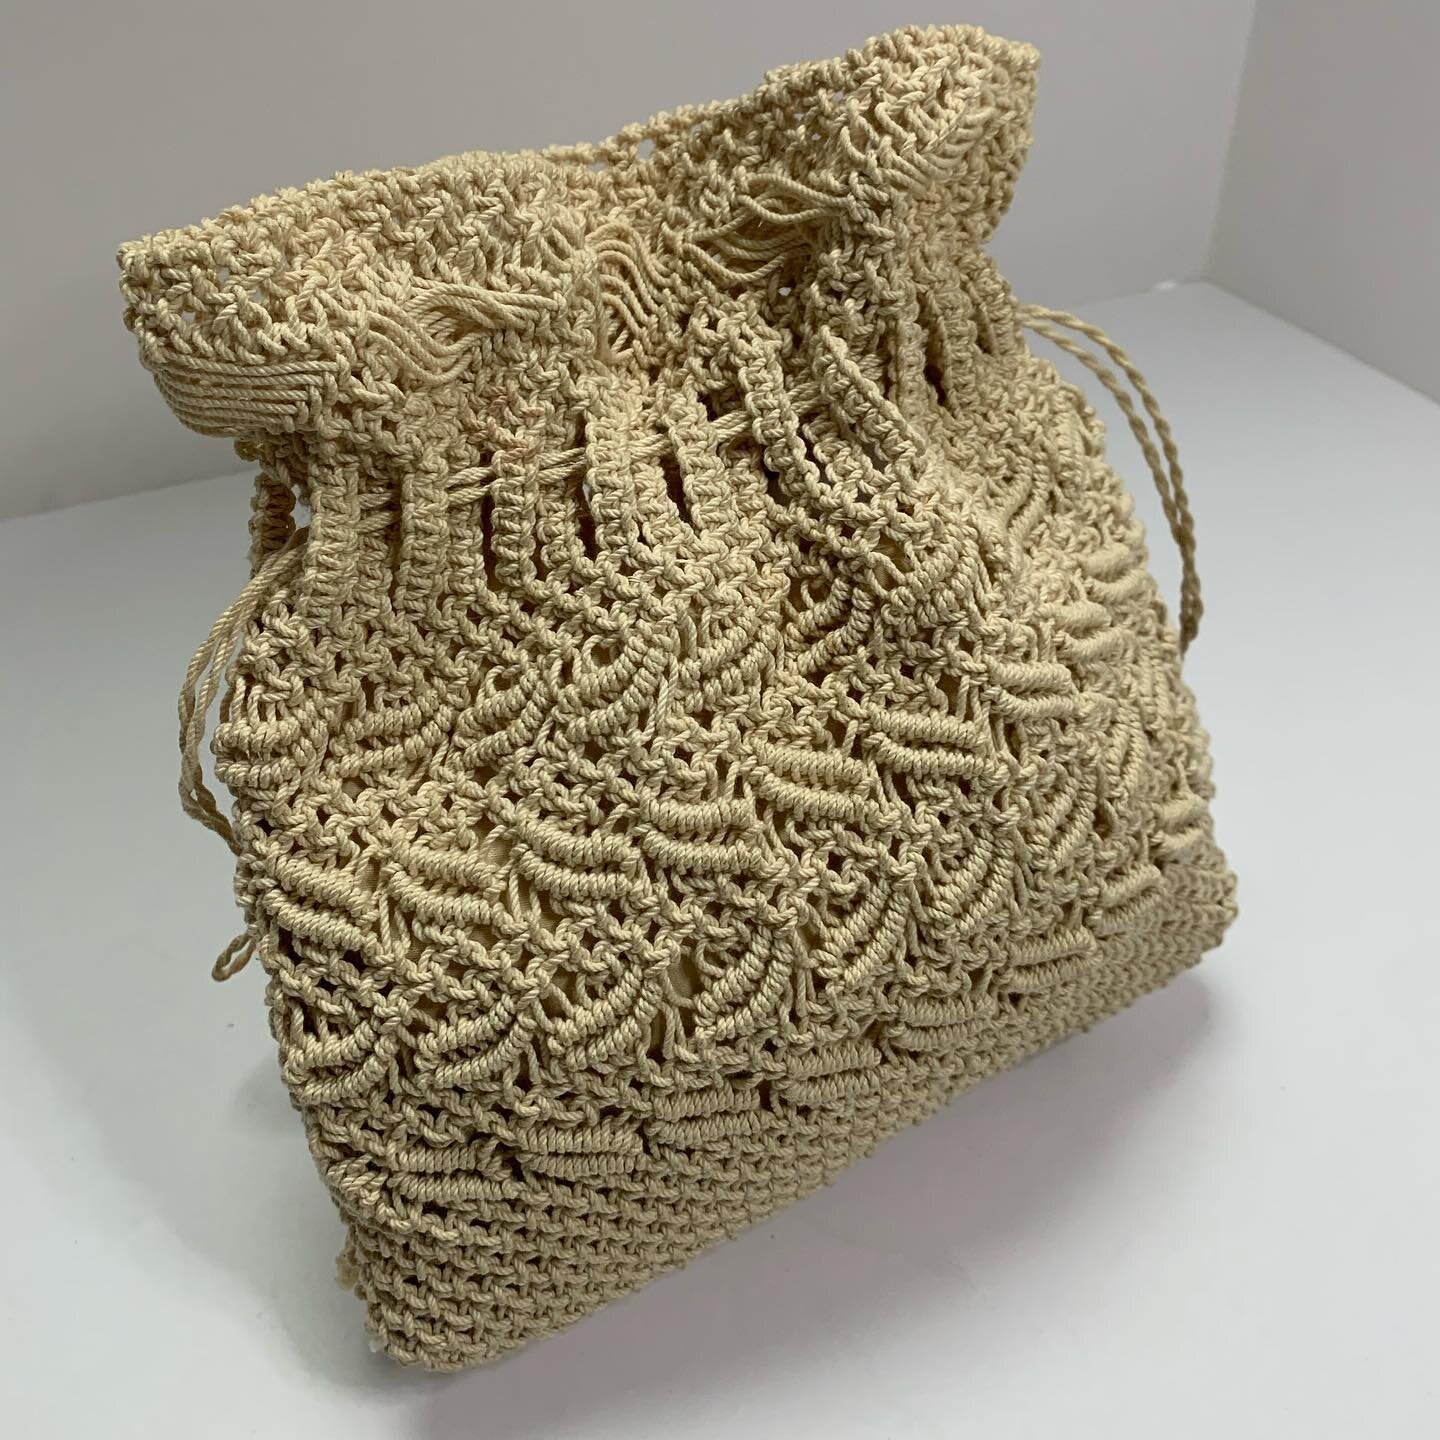 This chic, handwoven purse is going for a song this weekend in my summer bag blowout @thehuntct ! #vintagesale #vintagebags #summervibes #summerfashion #bohostyle #luxelook